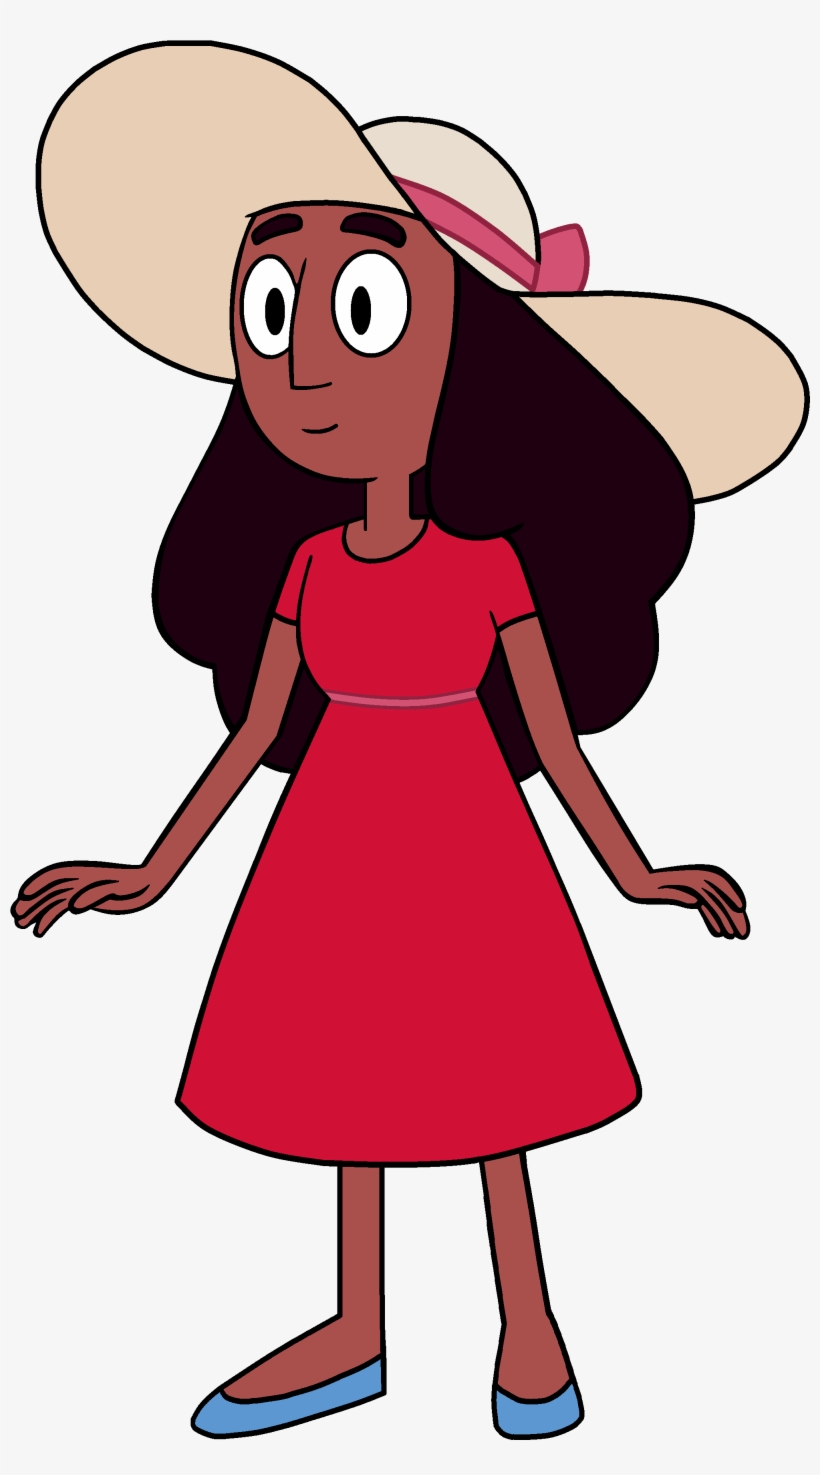 00, February 20, 2016 - Steven Universe Connie Outfits, transparent png #3479042